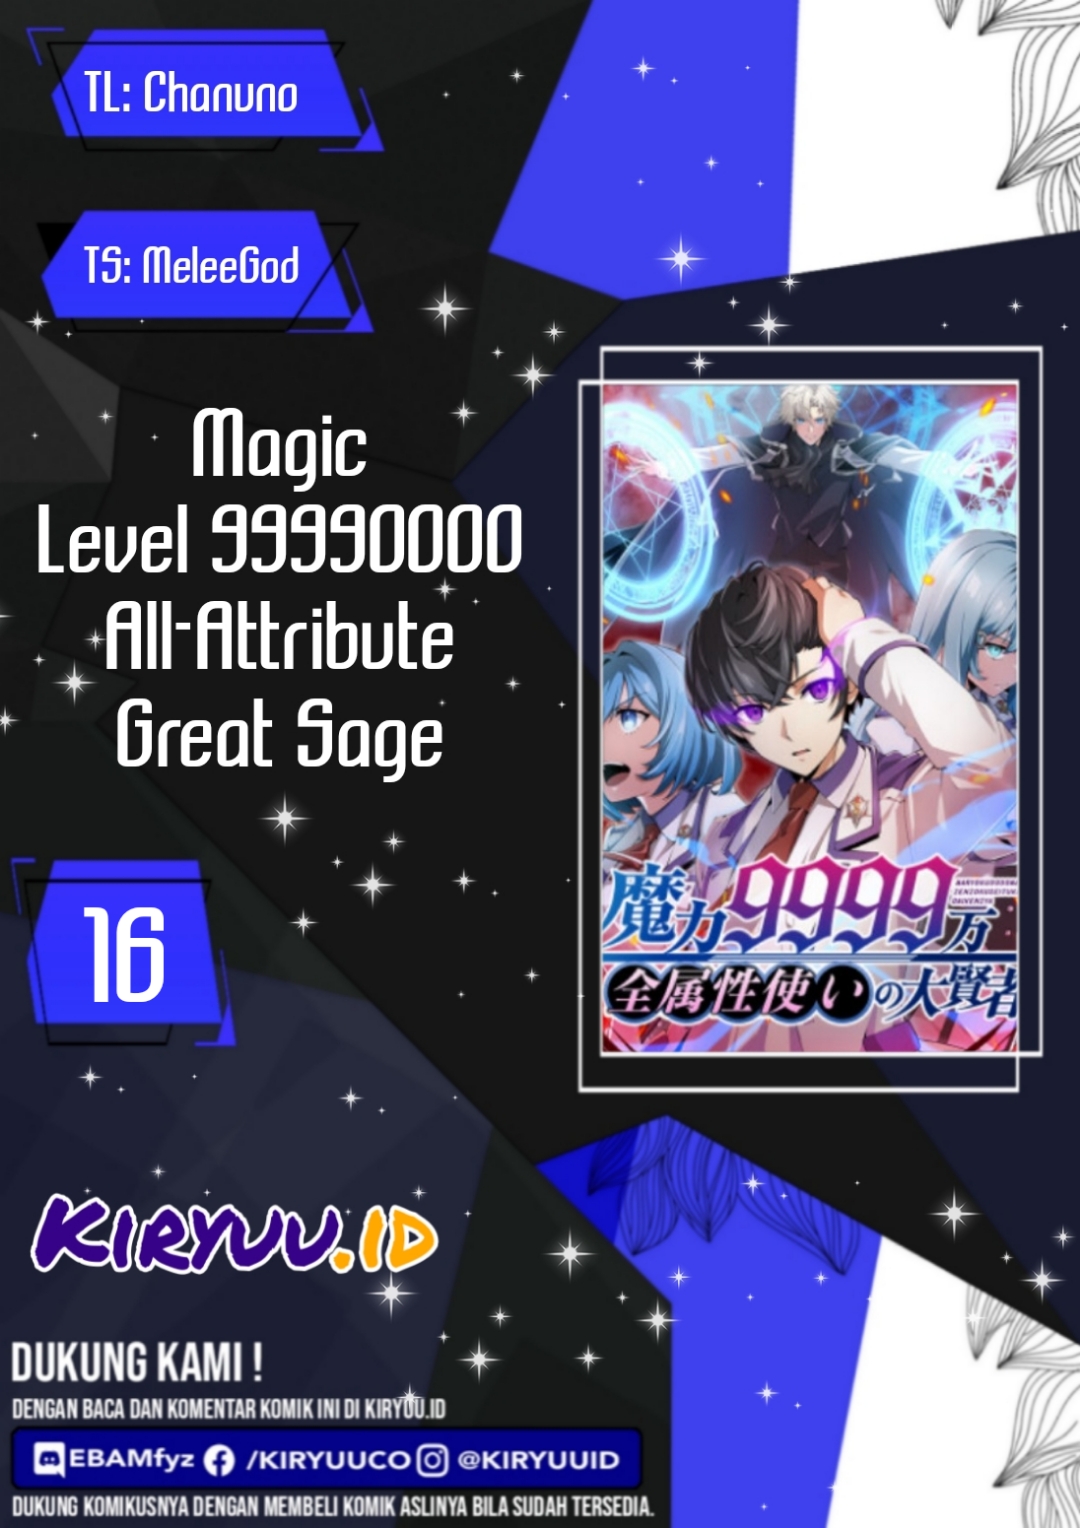 Magic Level 99990000 All-attribute Great Sage Chapter 16